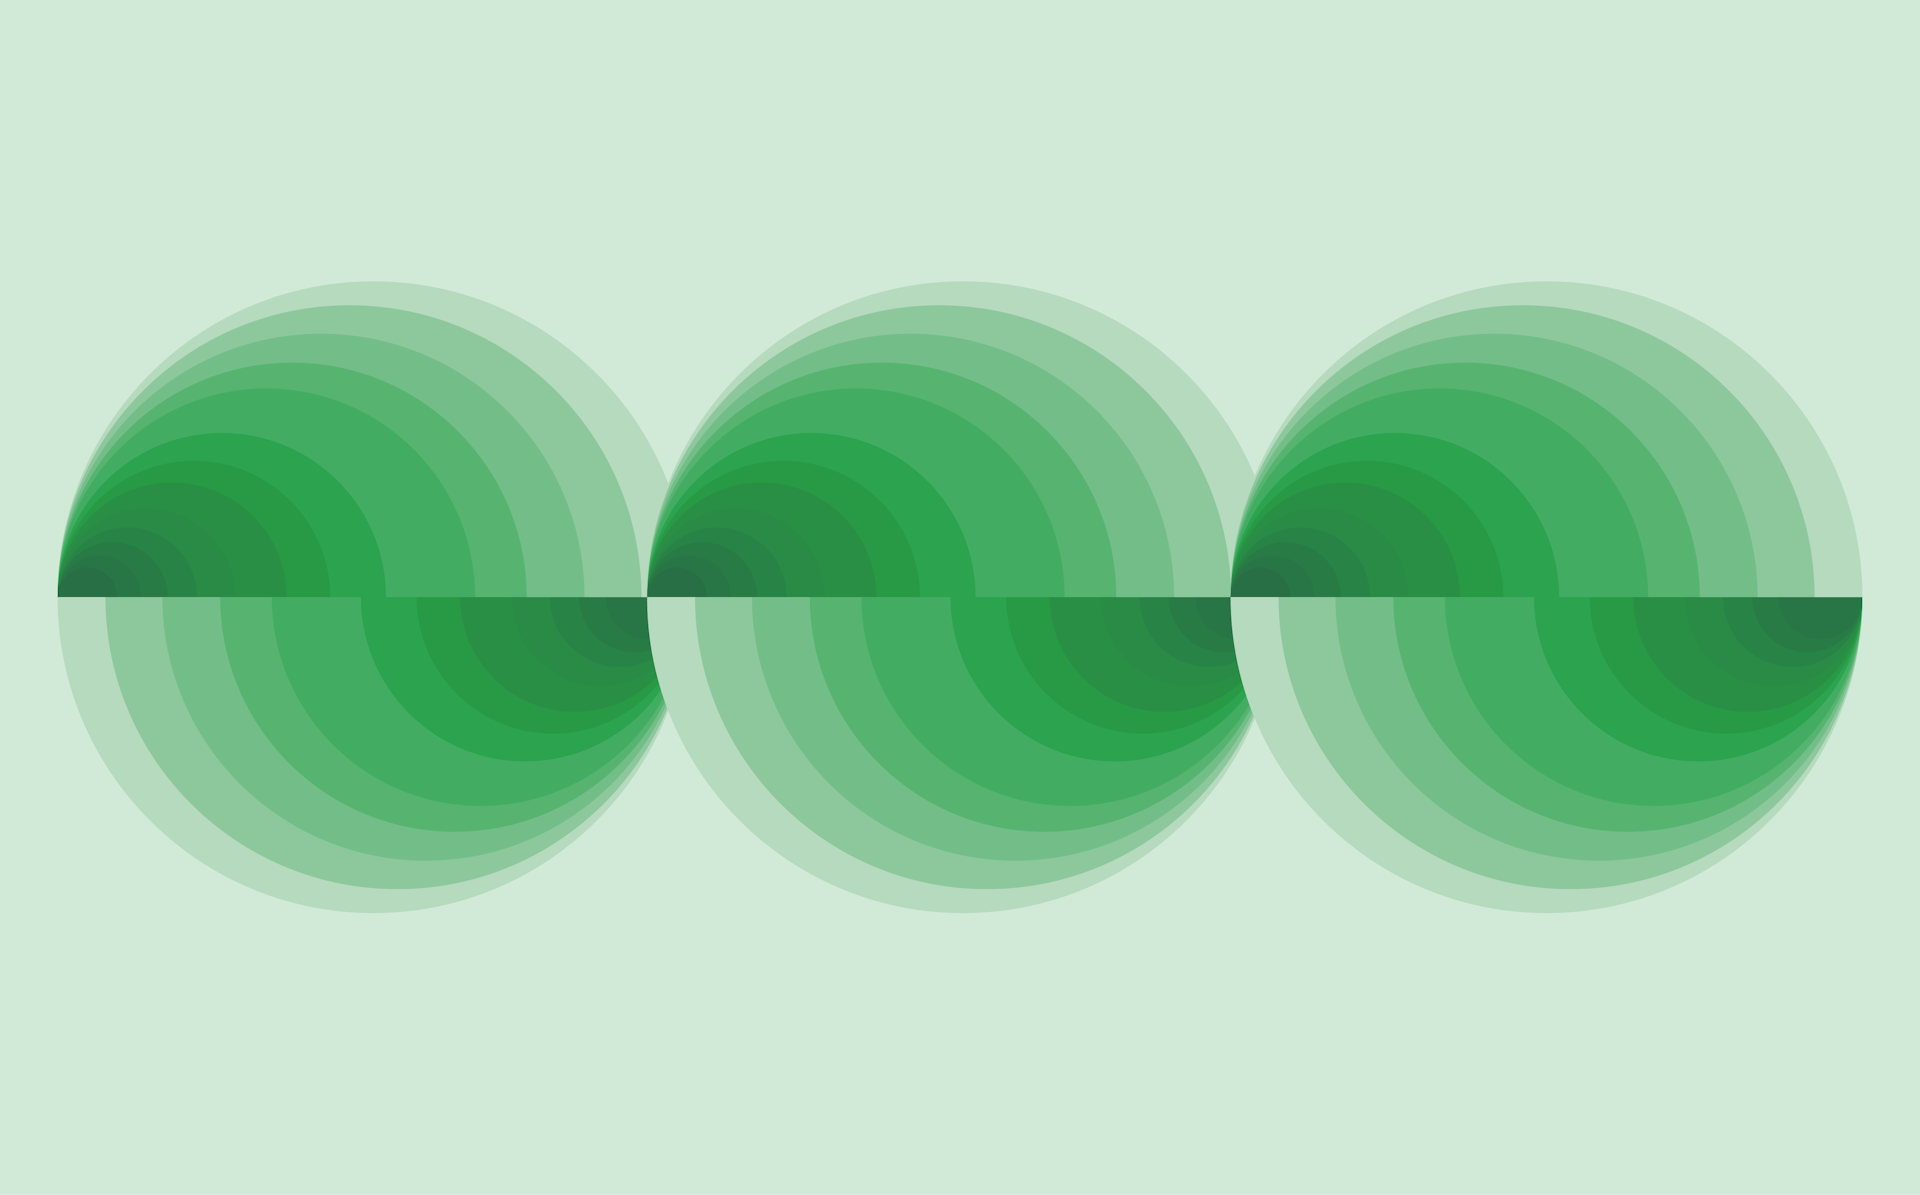 An illustration of three circles with gradients of green rippling through them to create the illusion of motion.